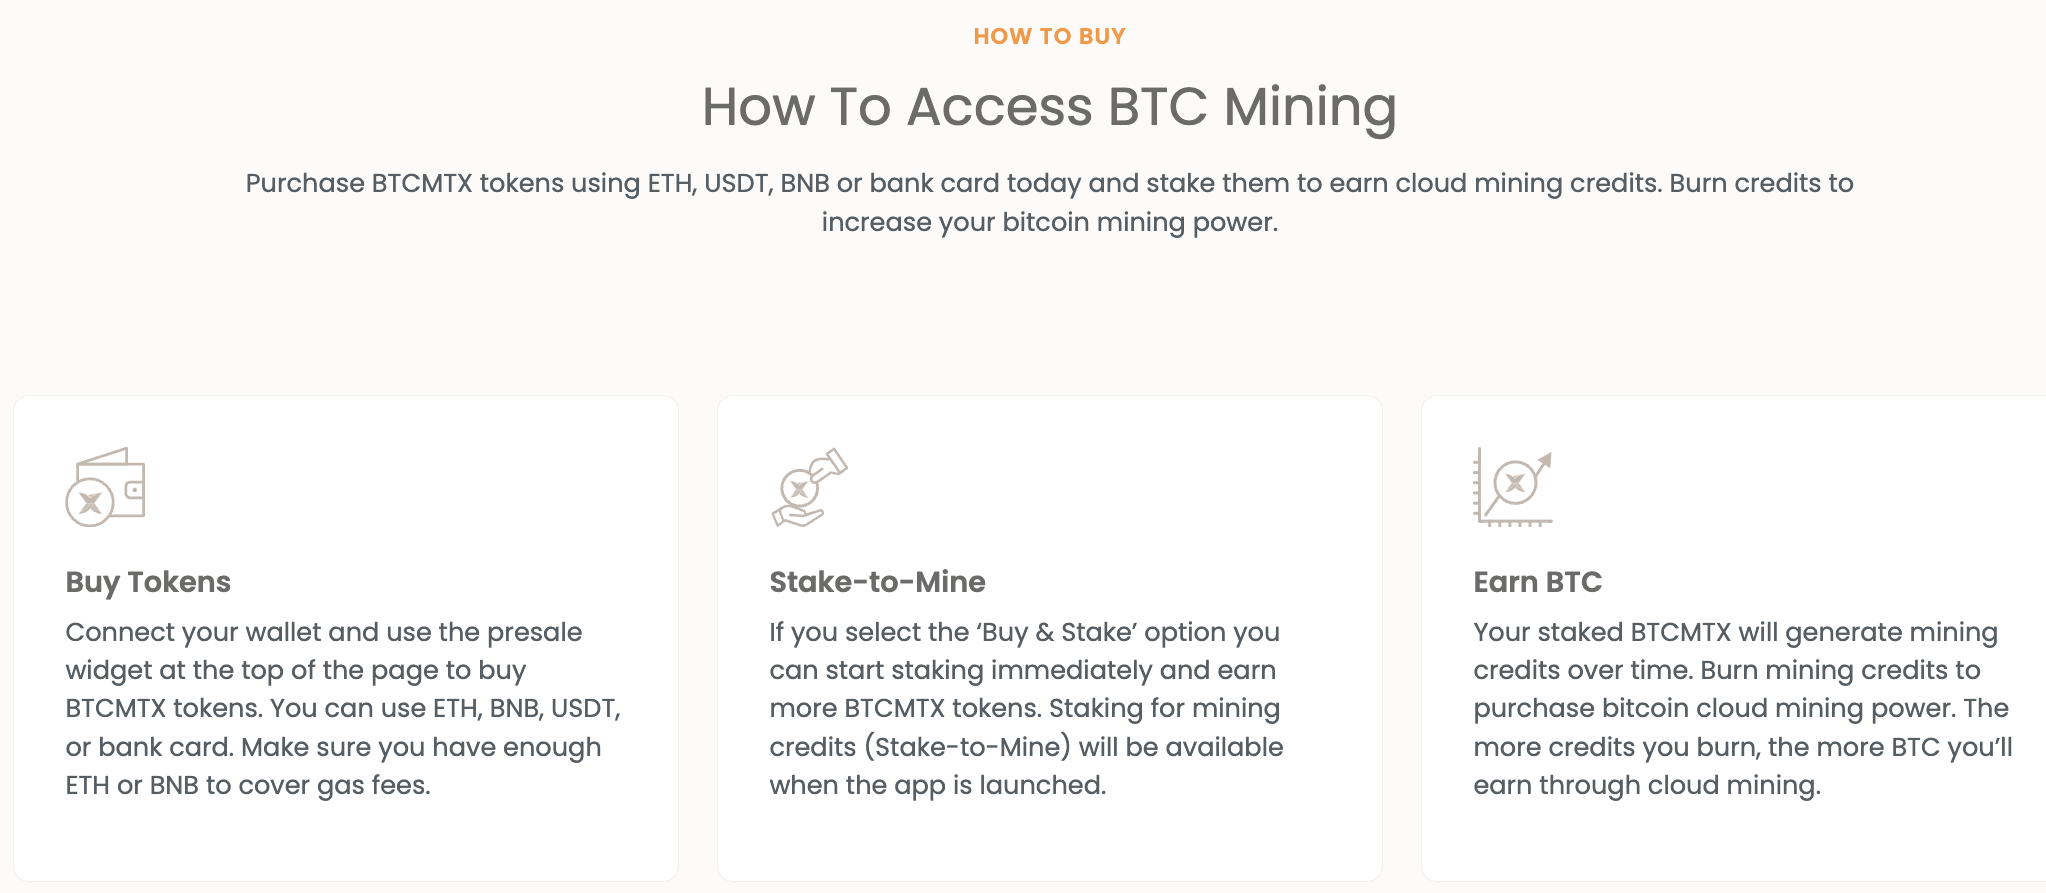 How to buy BTCMTX